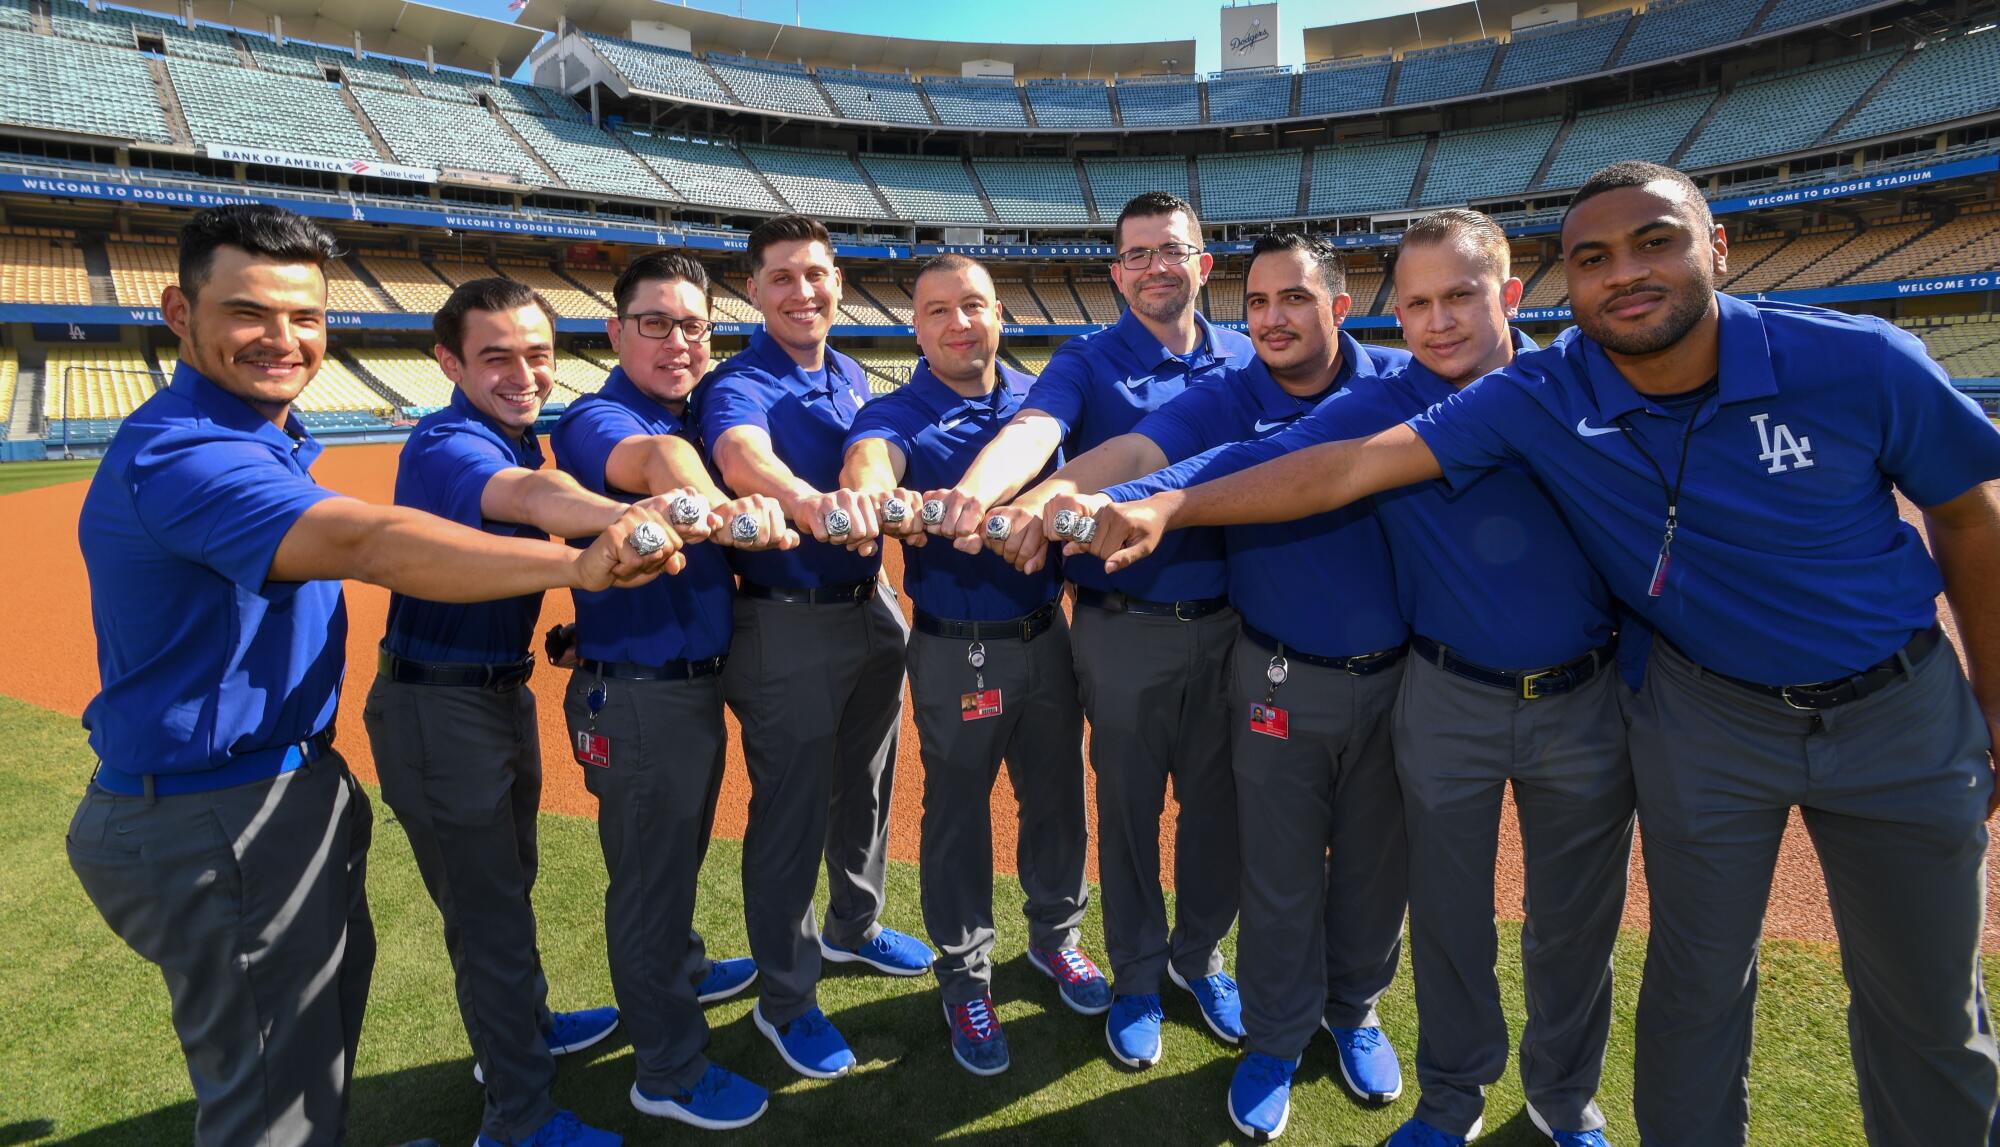 Inside the world of Dodgers' bat boys (who are really men) - Los